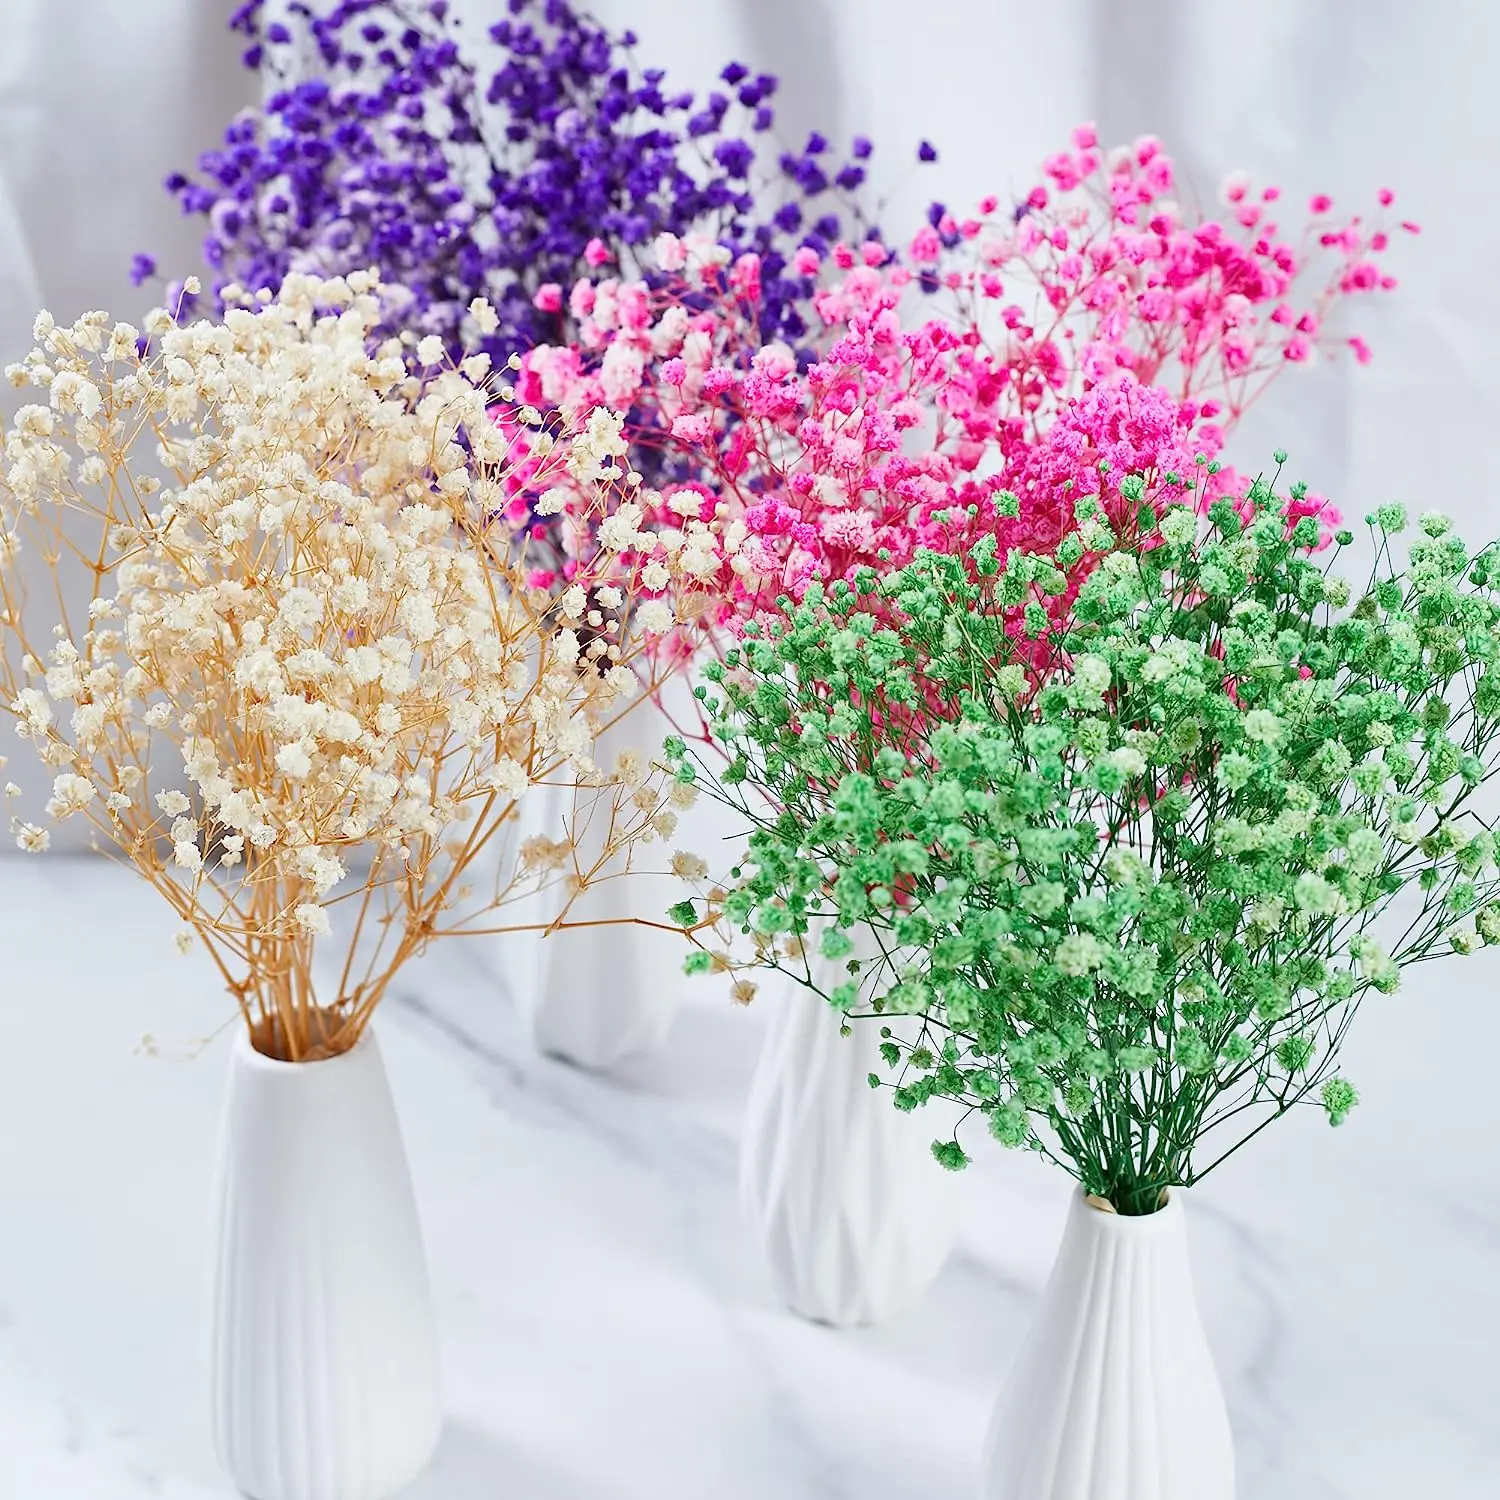 

Baby's Breath Natural Dried Flowers Perfect for Autumn Halloween Christmas Weddings Rustic Boho Romantic Home Decor DIY Crafts